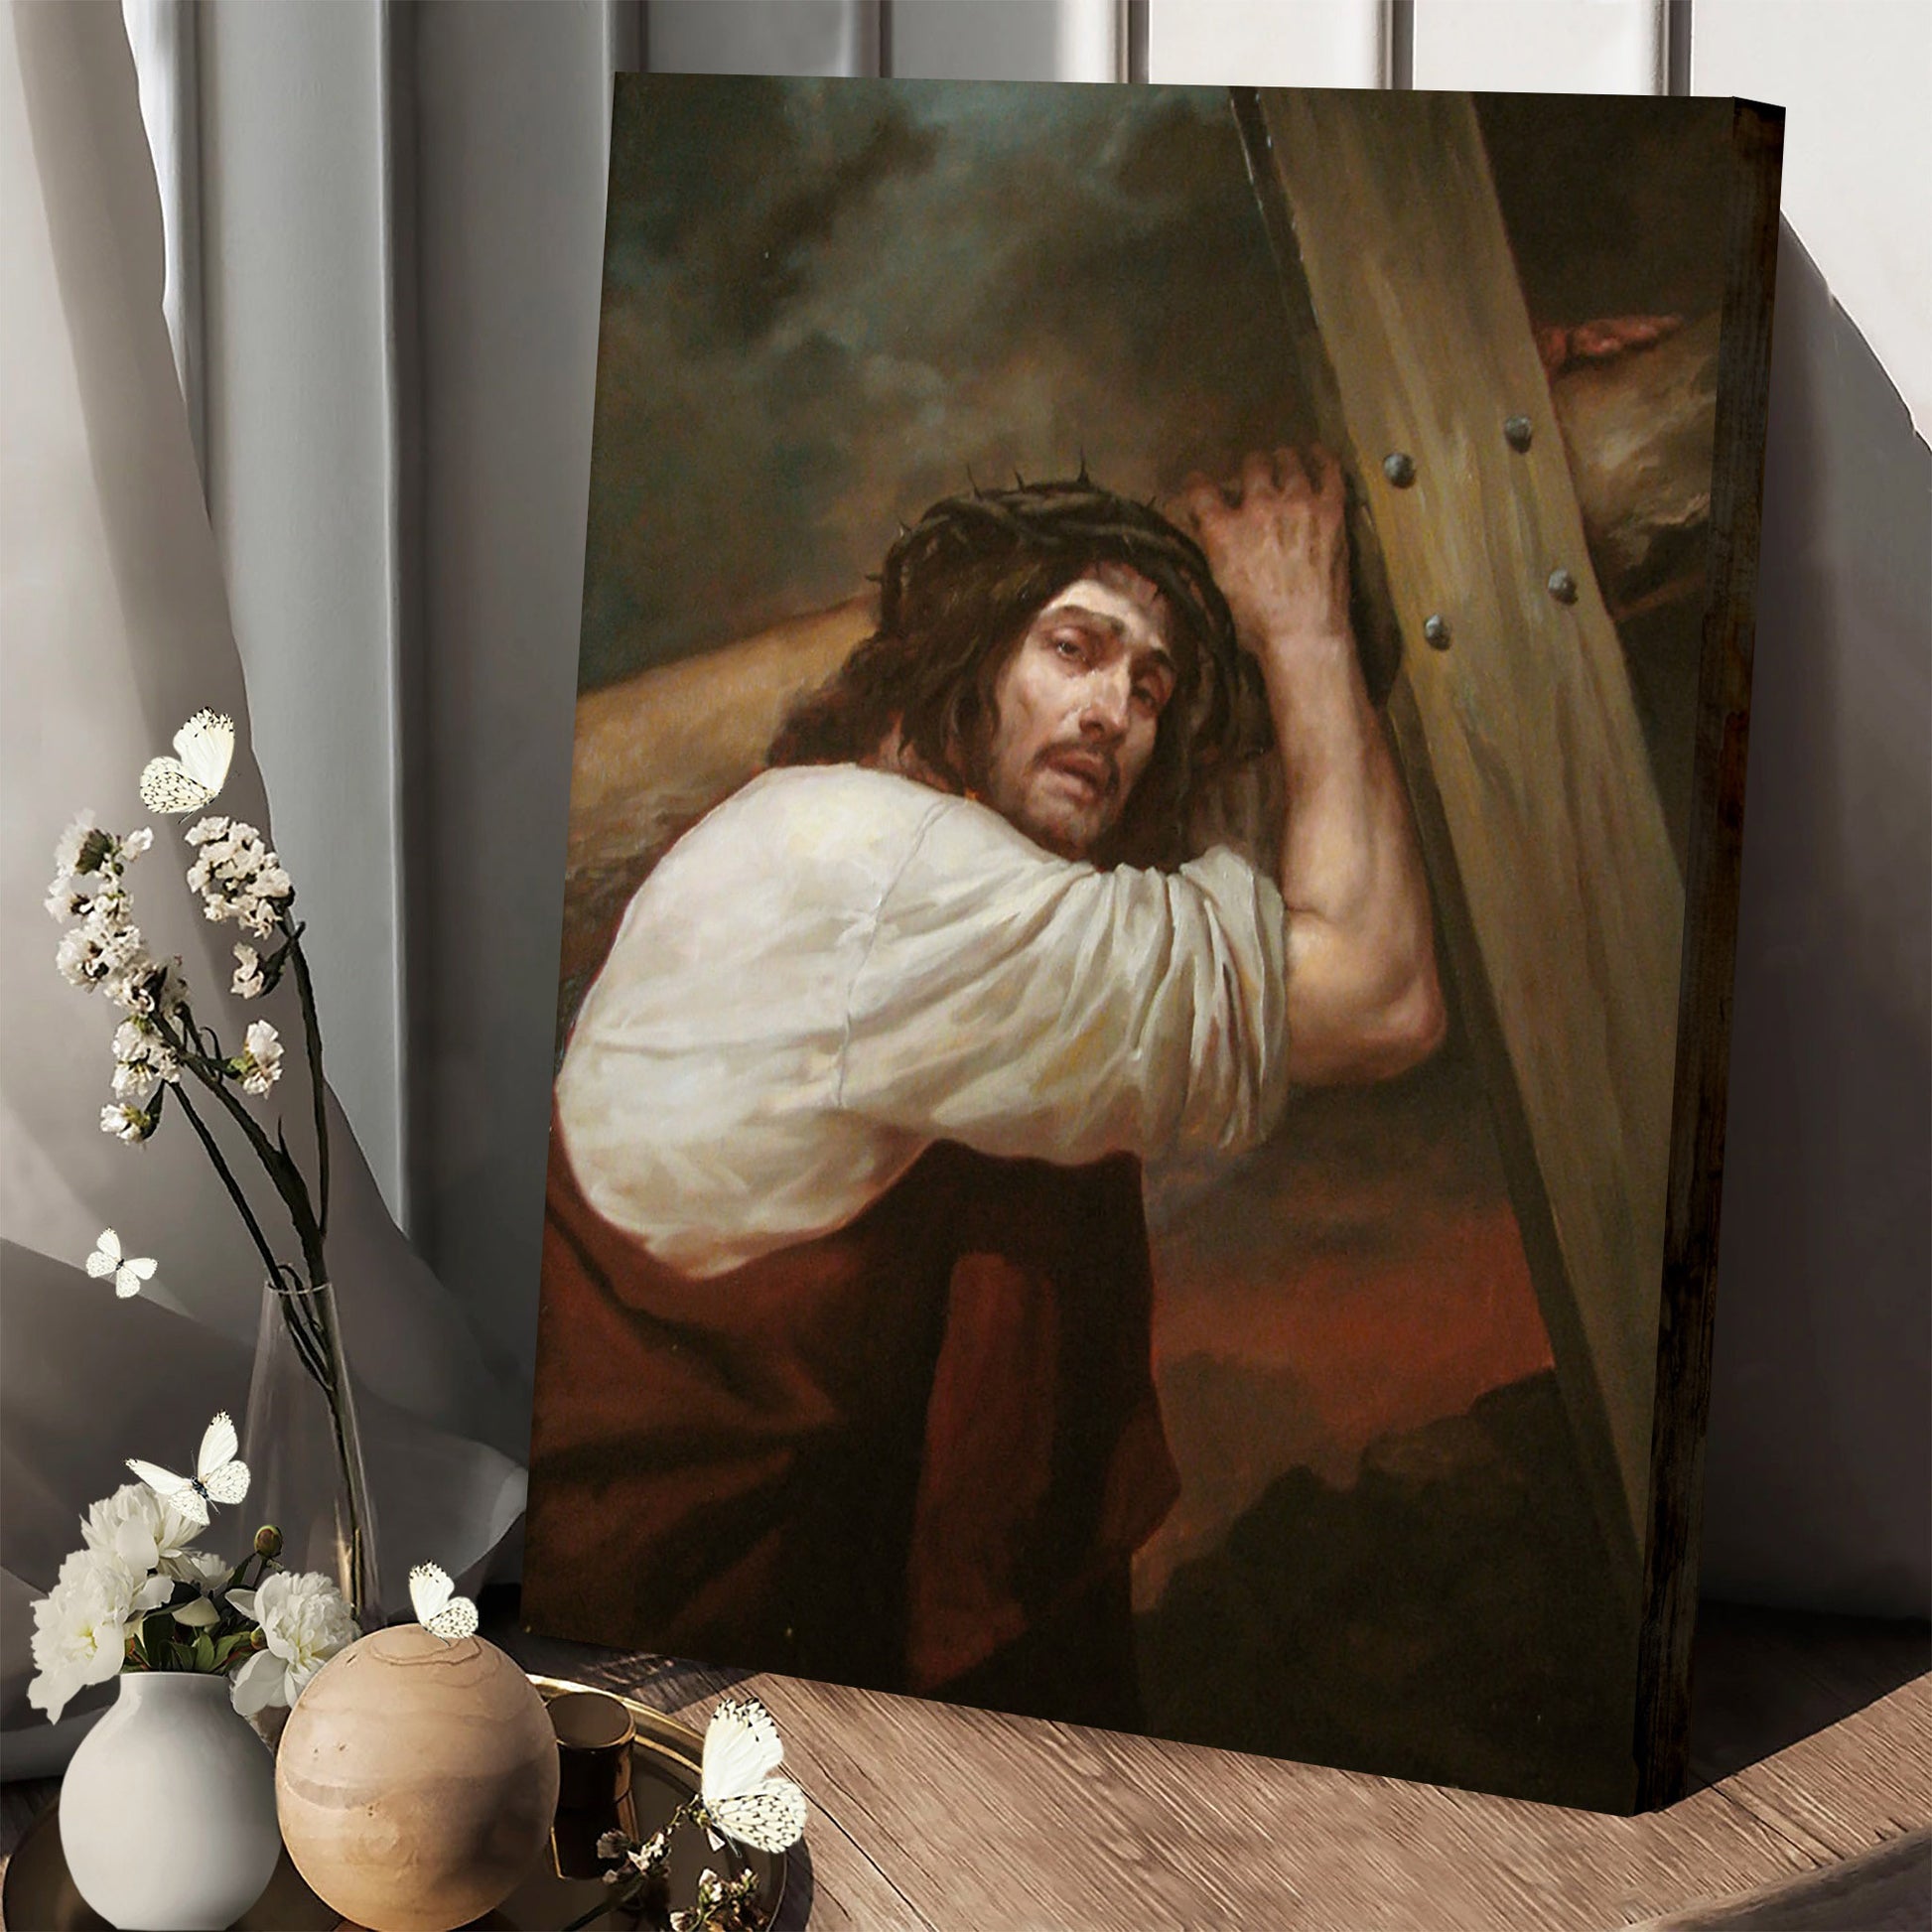 Jesus Christ Carrying The Cross 1 Canvas Picture - Jesus Christ Canvas Art - Christian Wall Canvas